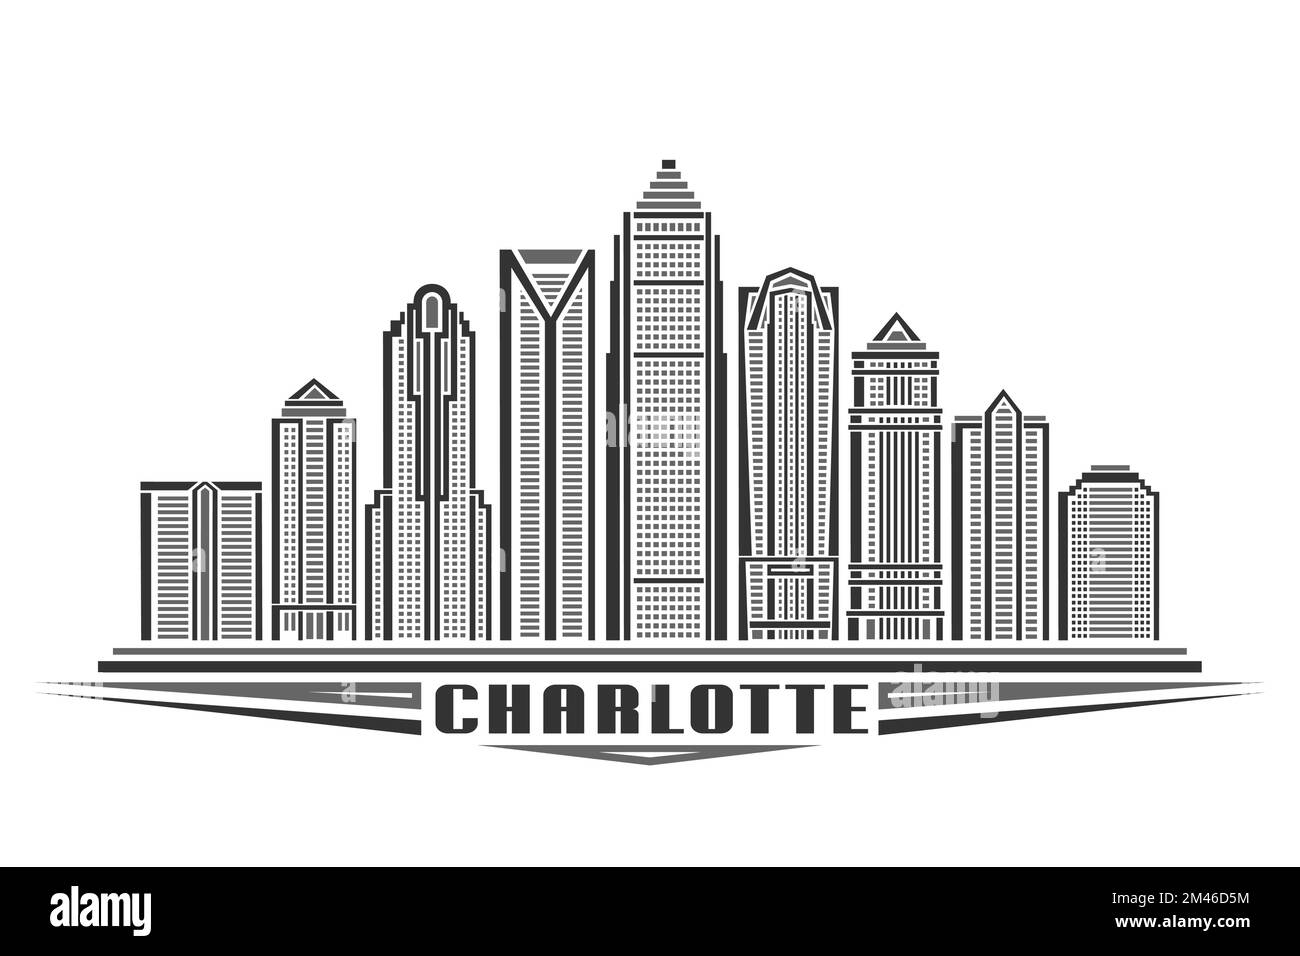 Vector illustration of Charlotte, monochrome horizontal poster with linear design famous charlotte city scape, urban line art concept with decorative Stock Vector